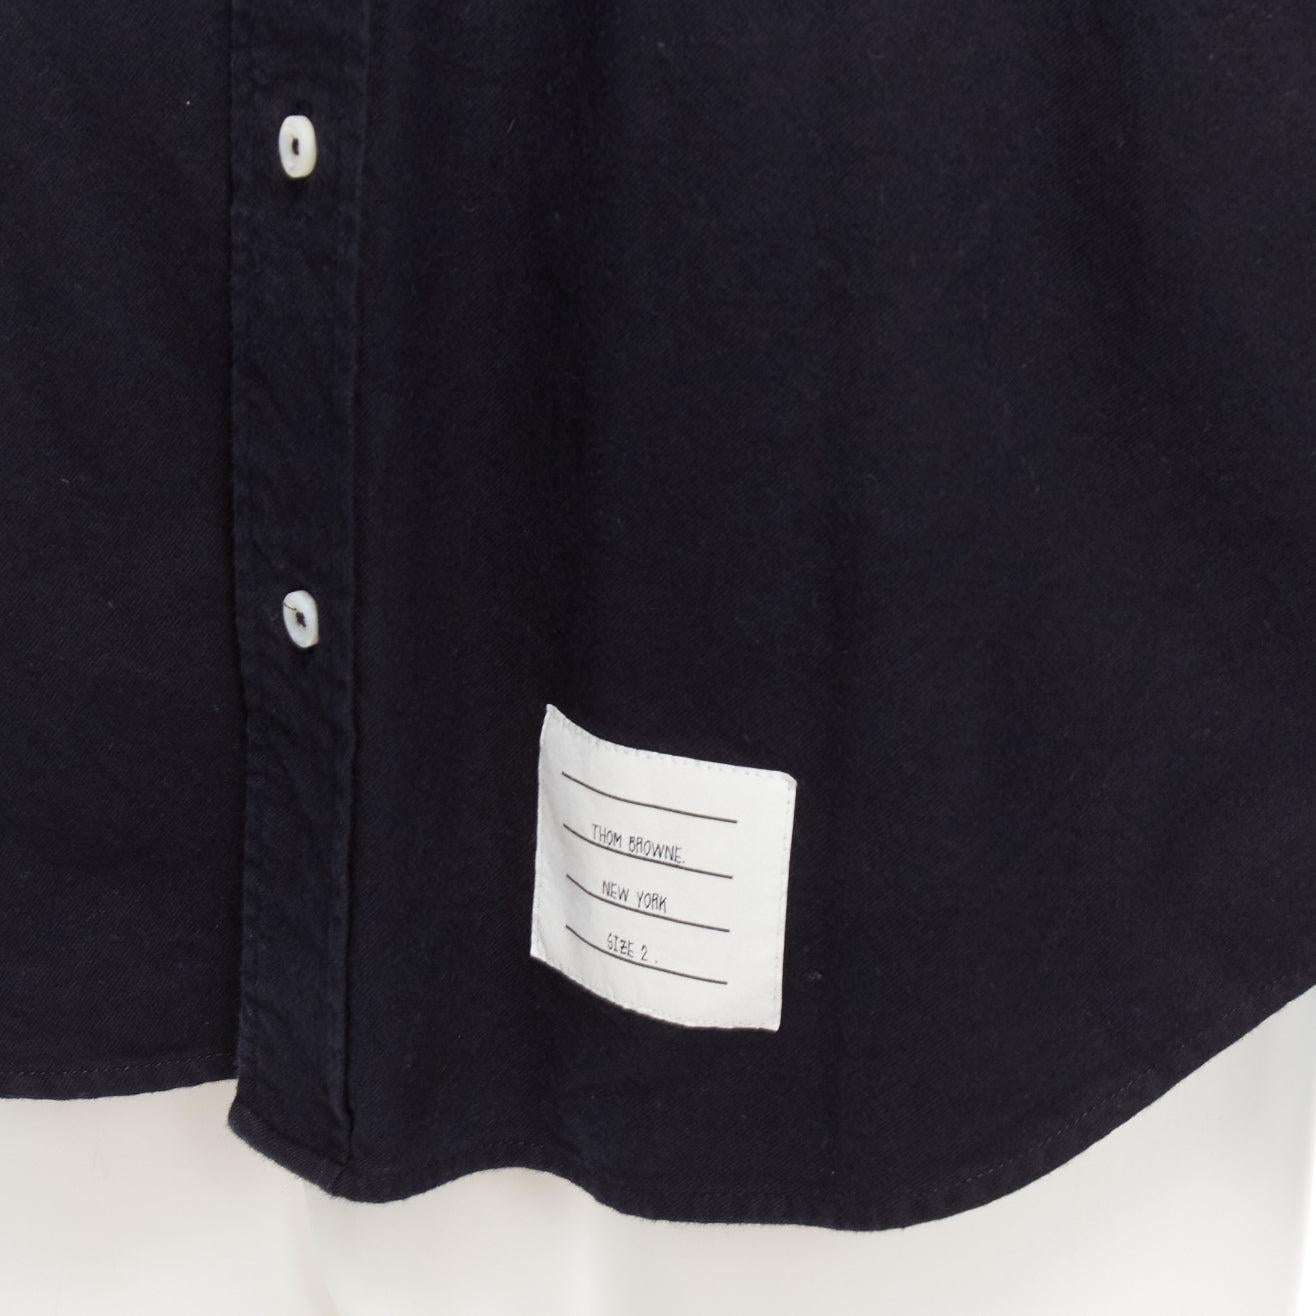 THOM BROWNE Four Bar black grey cotton classicTB tab shirt JP2 M
Reference: YIKK/A00020
Brand: Thom Browne
Designer: Thom Browne
Material: Cotton
Color: Grey, Black
Pattern: Striped
Closure: Button
Extra Details: TB tabs at front hem and back